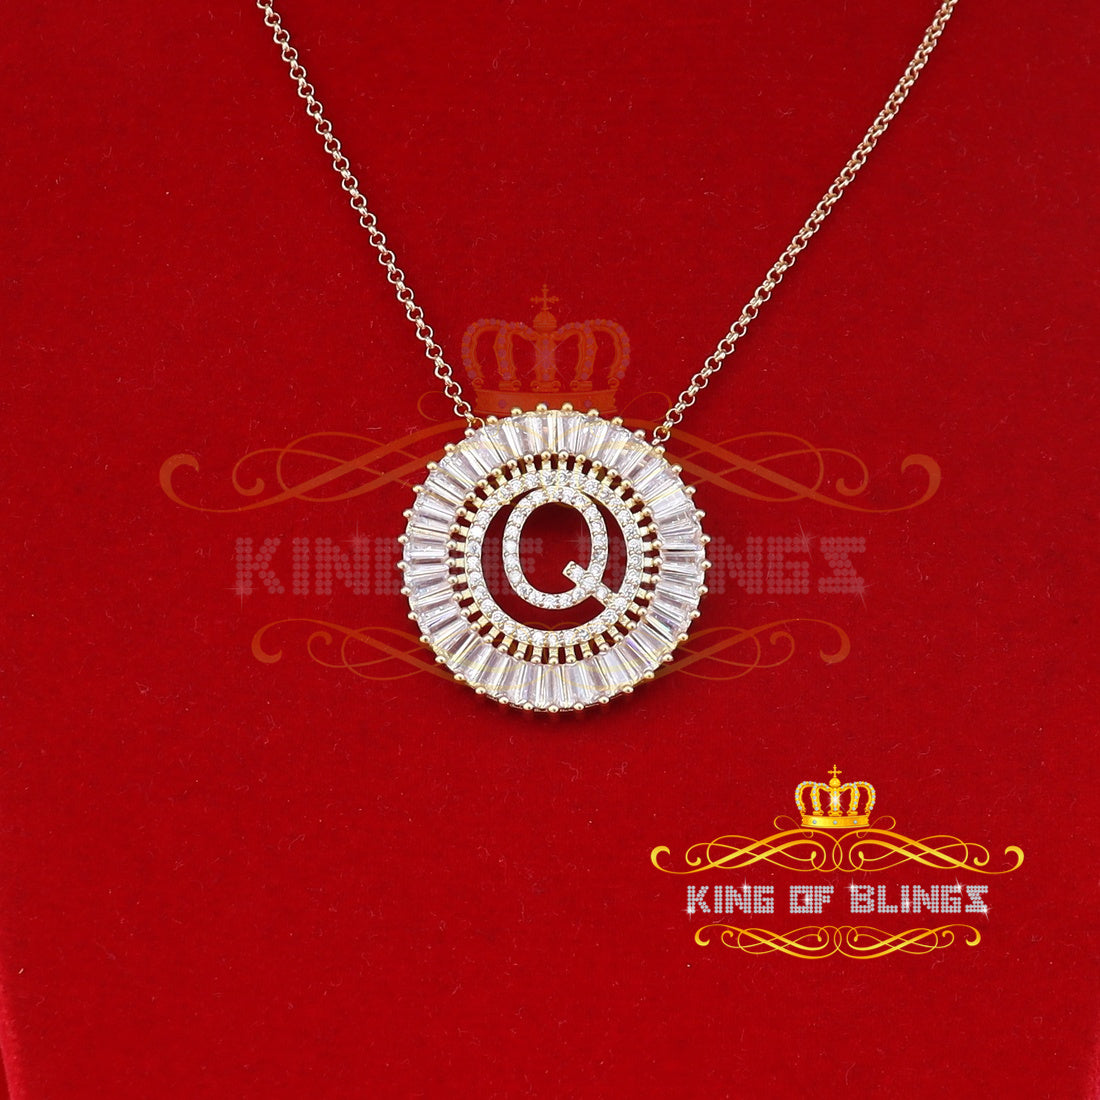 Woman's Necklace Circle Hollow Out Cubic Zirconia in Yellow Metal Letter Pendant KING OF BLINGS